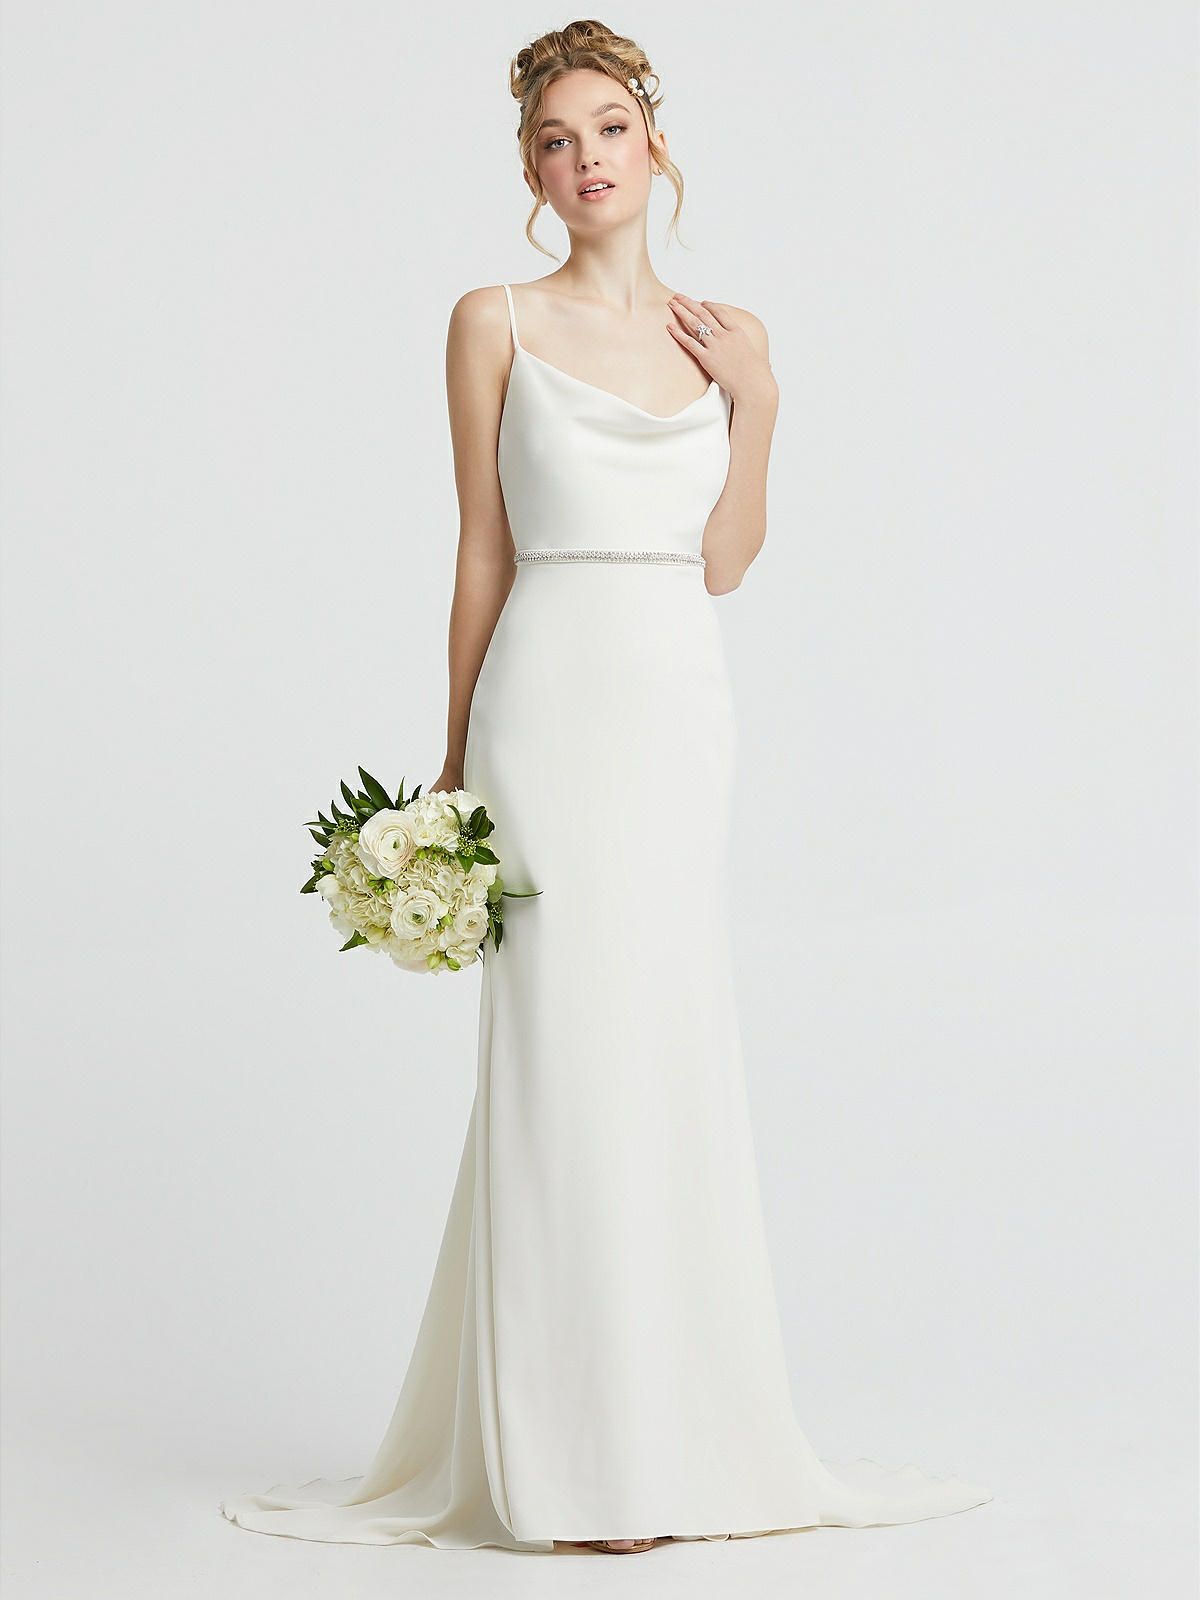 Cowl-Neck Convertible Strap Mermaid Wedding Dress with Beaded Belt | The Dessy Group